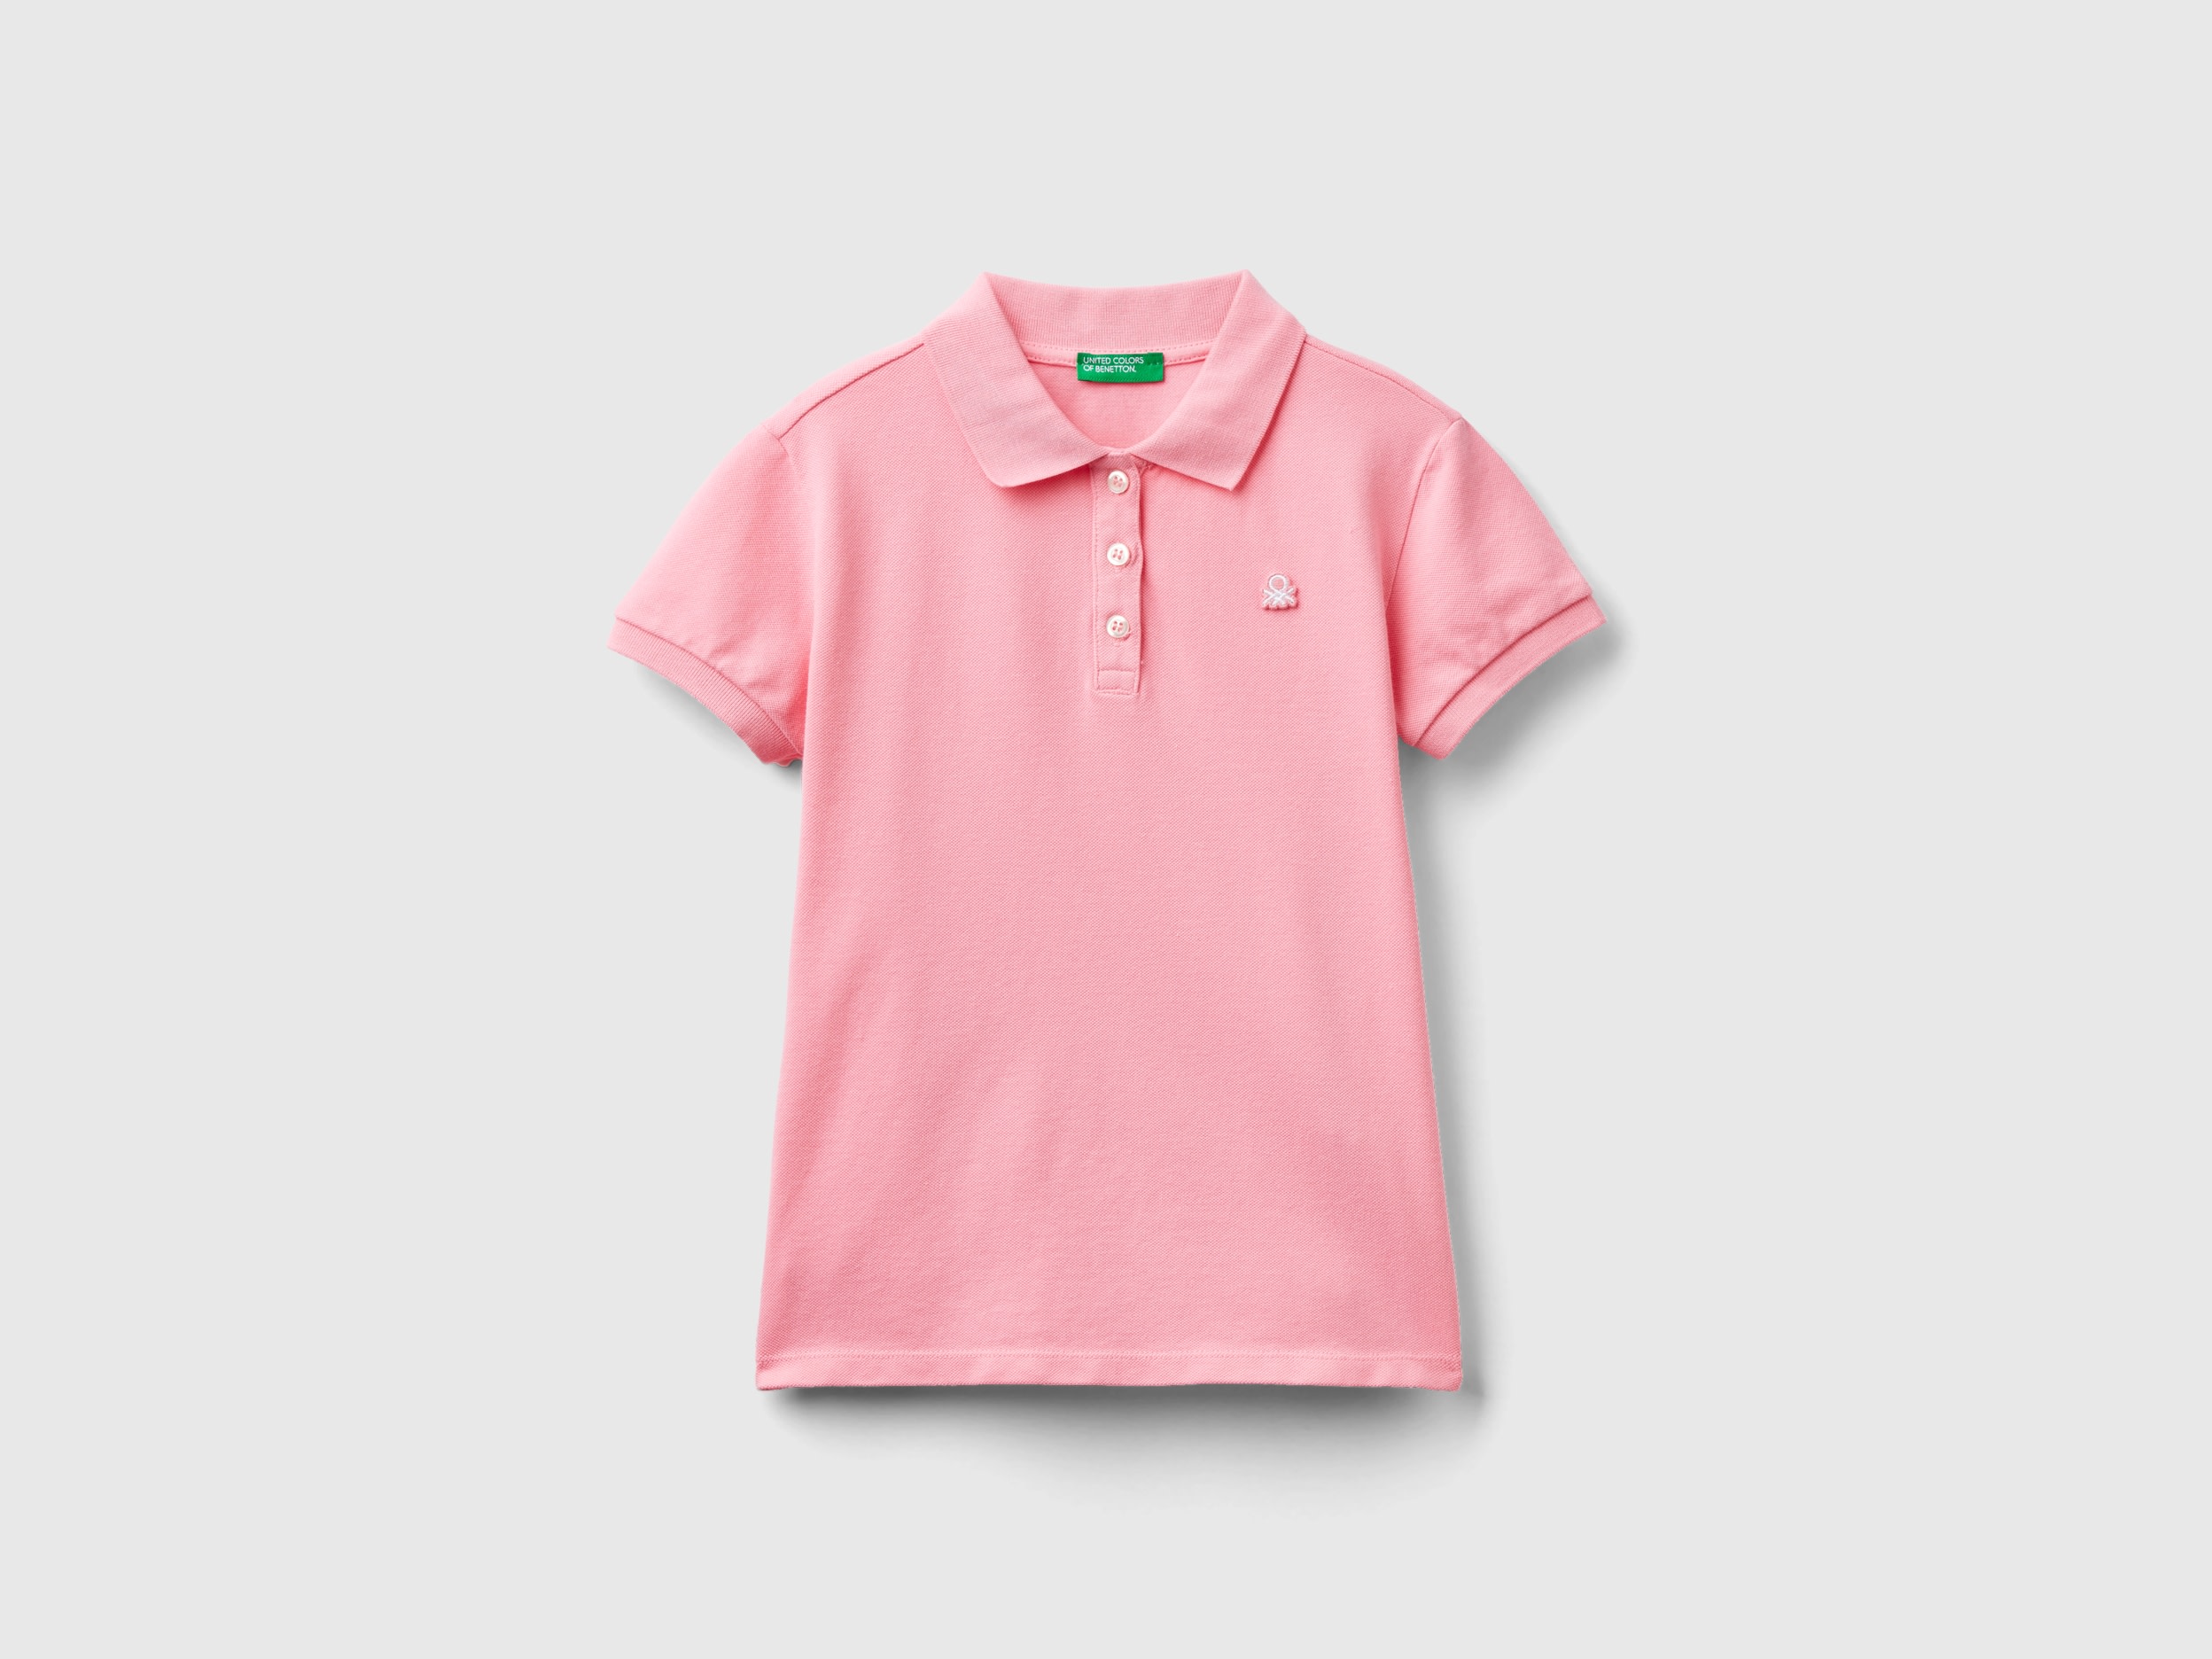 Image of Benetton, Short Sleeve Polo In Organic Cotton, size S, Pink, Kids